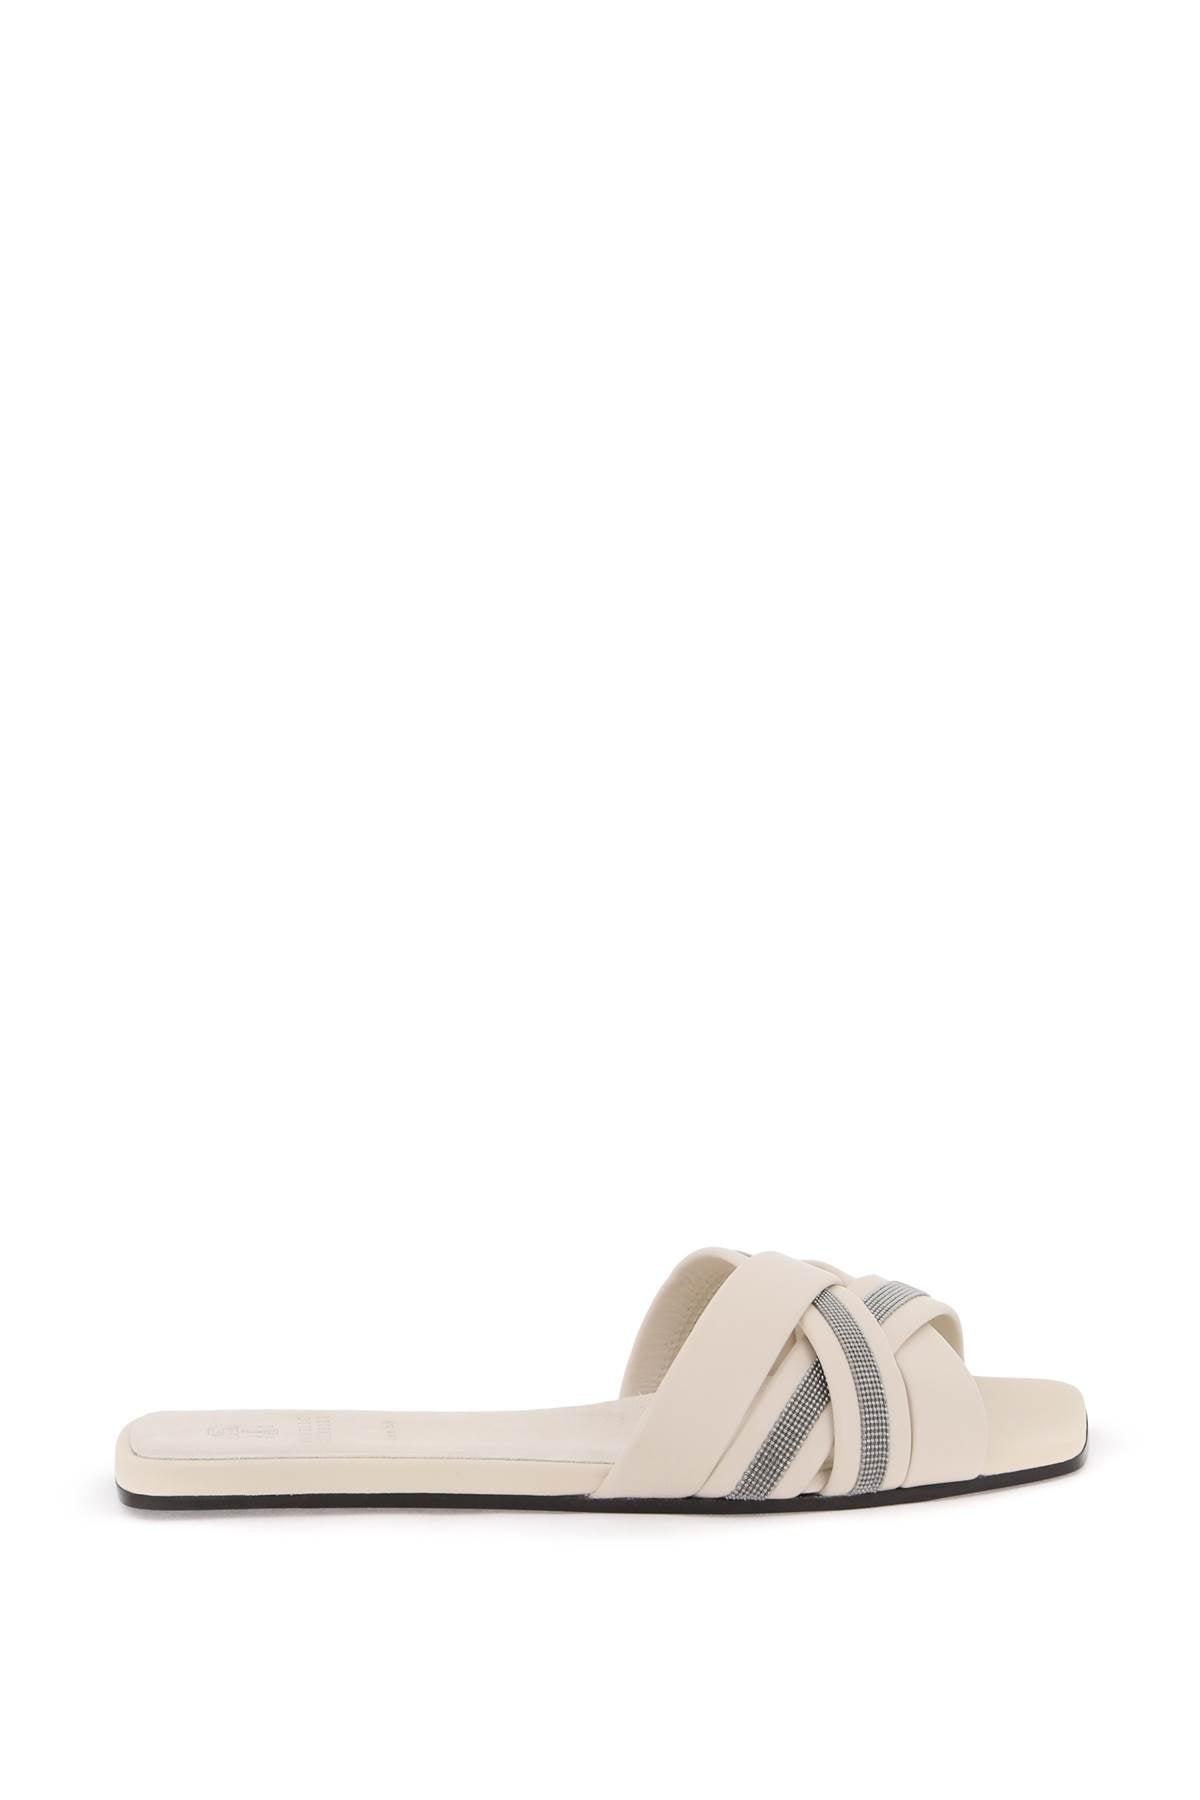 BRUNELLO CUCINELLI Elegant Ivory Leather Slide Sandals with Jewellery for Women